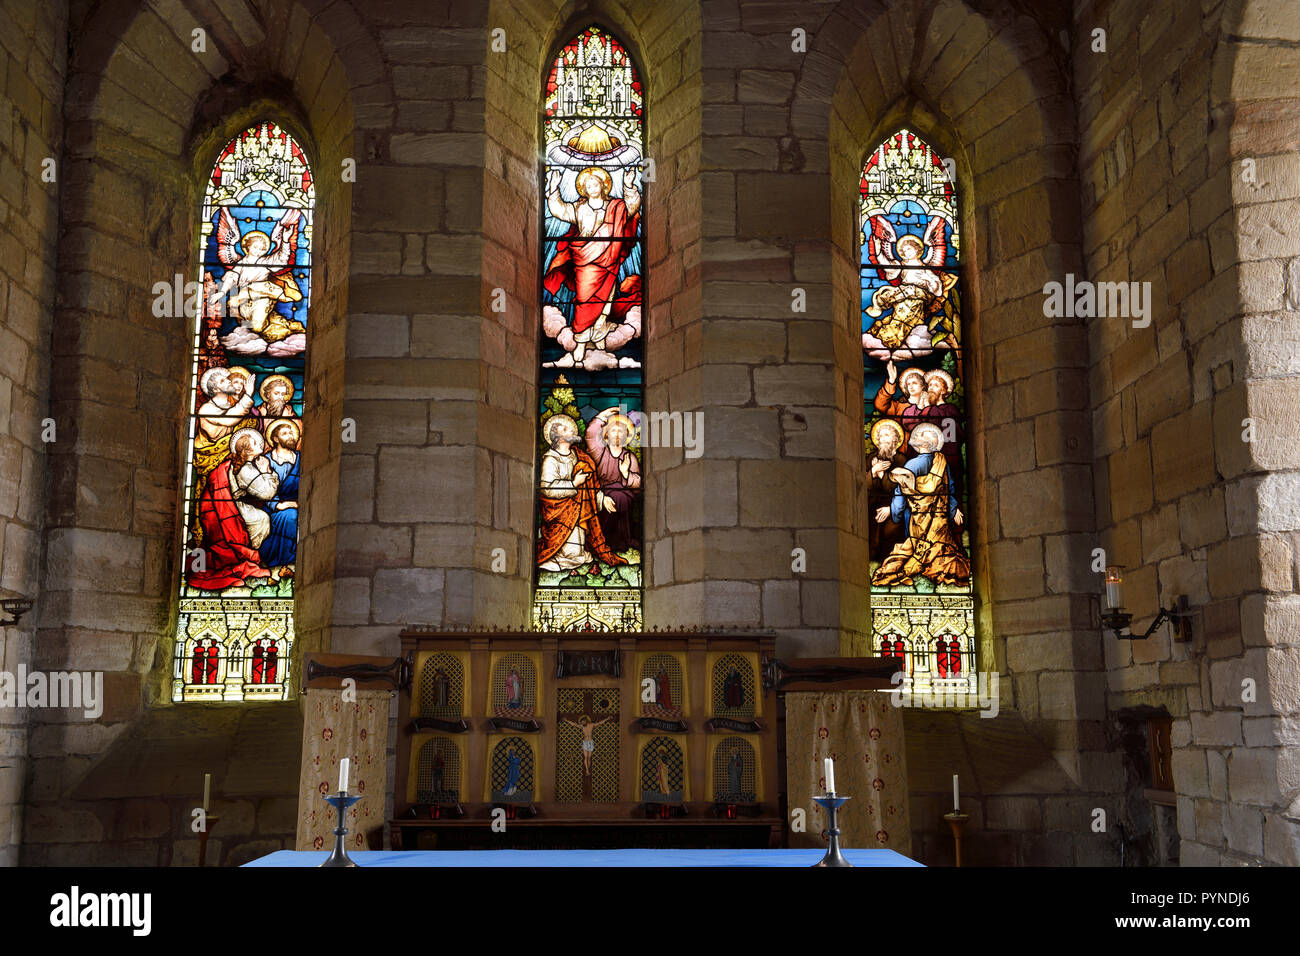 The Parish Church of Saint Mary the Virgin altar with stained glass windows depicting Ascension of Jesus Holy Island of Lindisfarne England UK Stock Photo